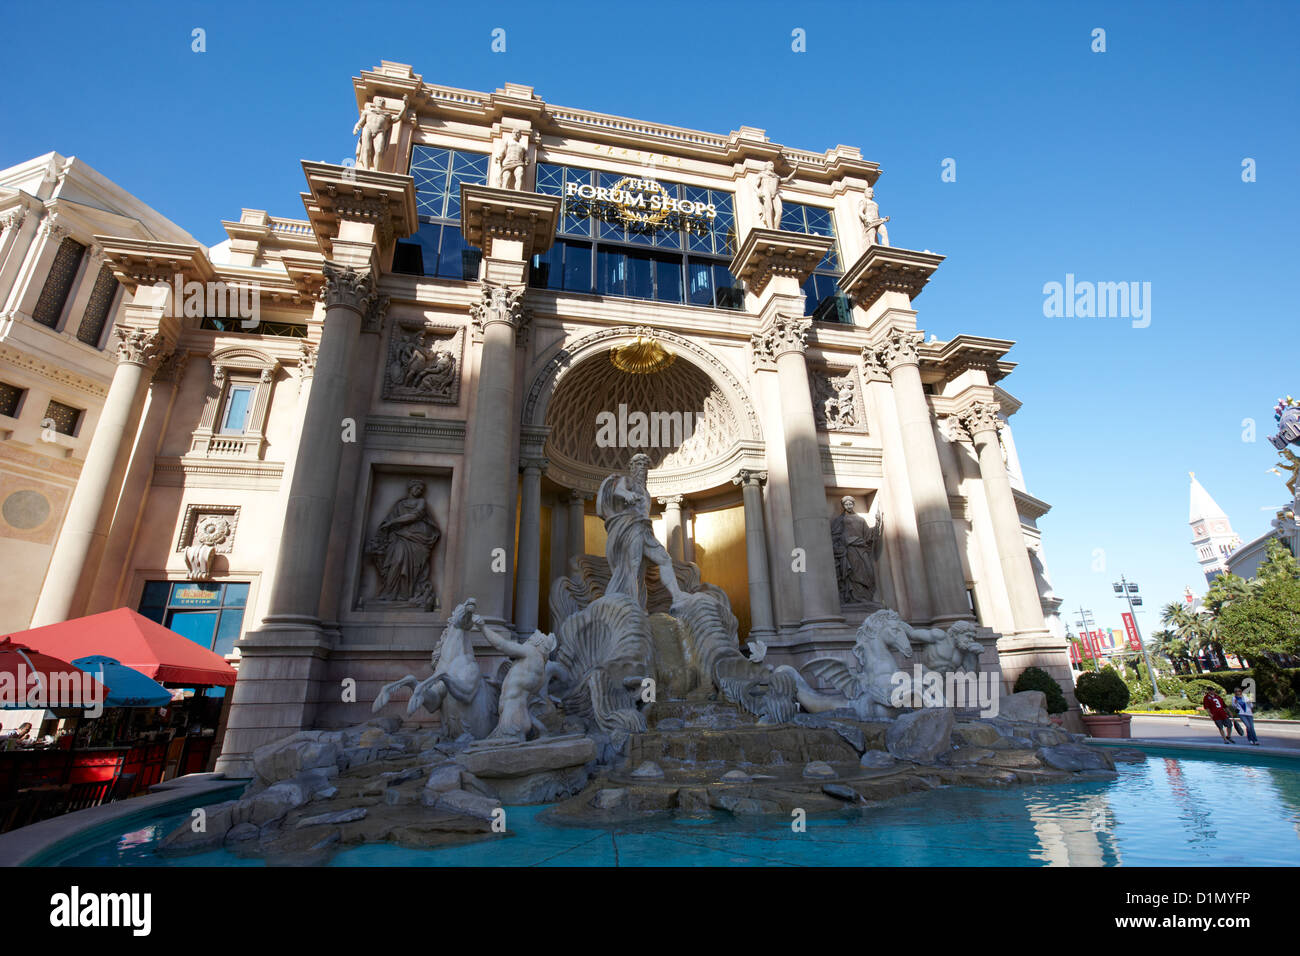 File:The Forum Shops at Caesars Palace (8276294113).jpg - Wikimedia Commons